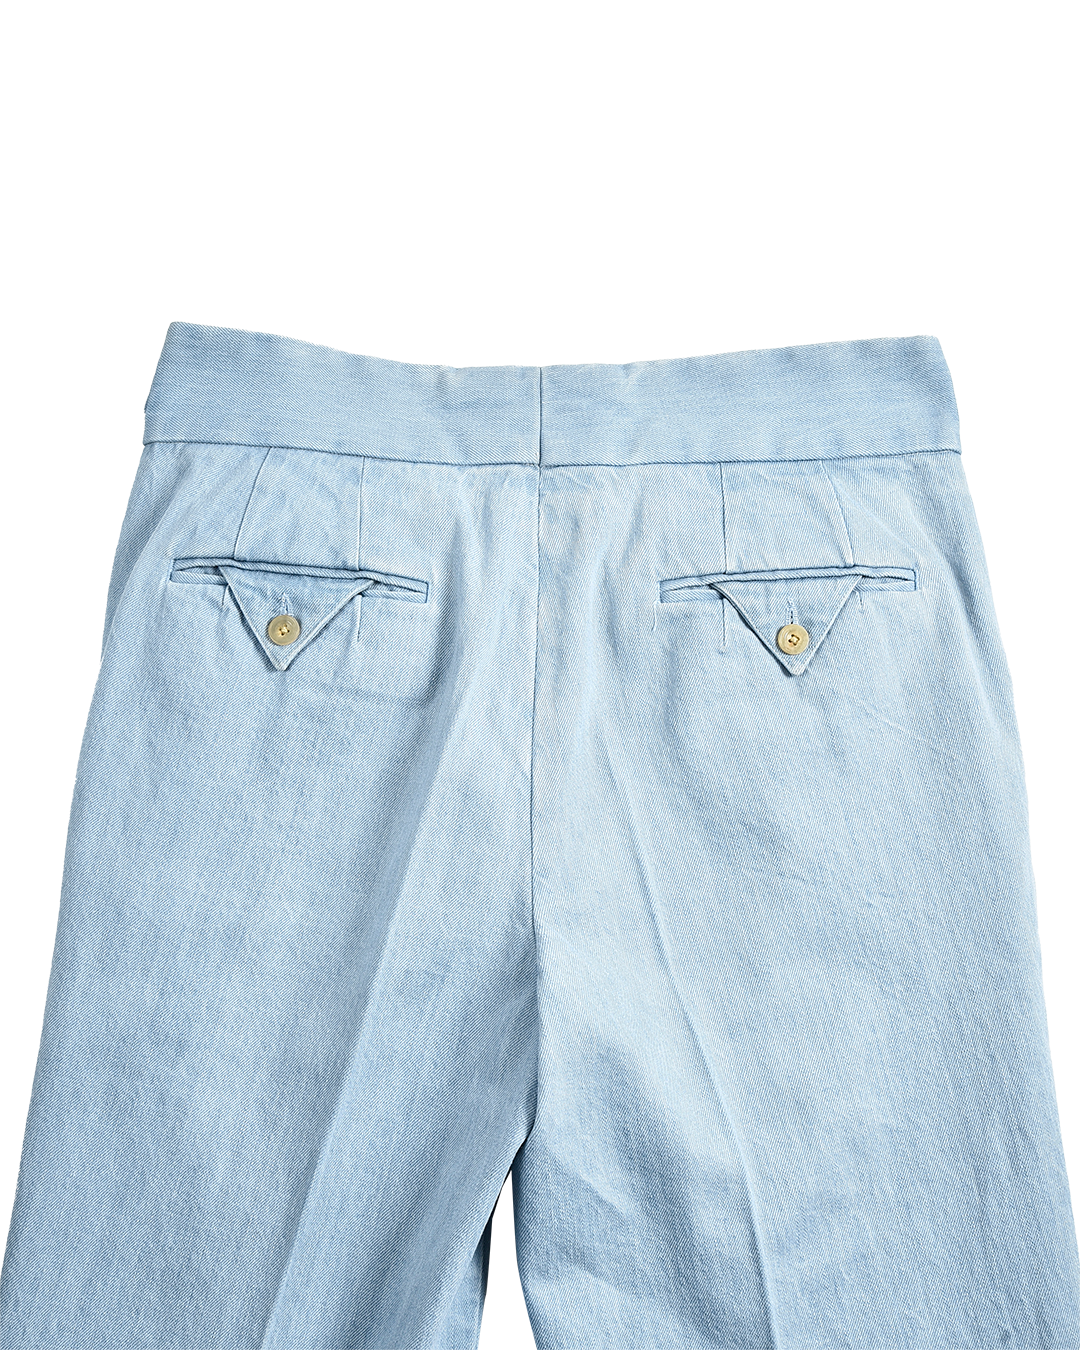 Gurkha Pant in Fade Washed Blue Selvage With Turquoise Tint